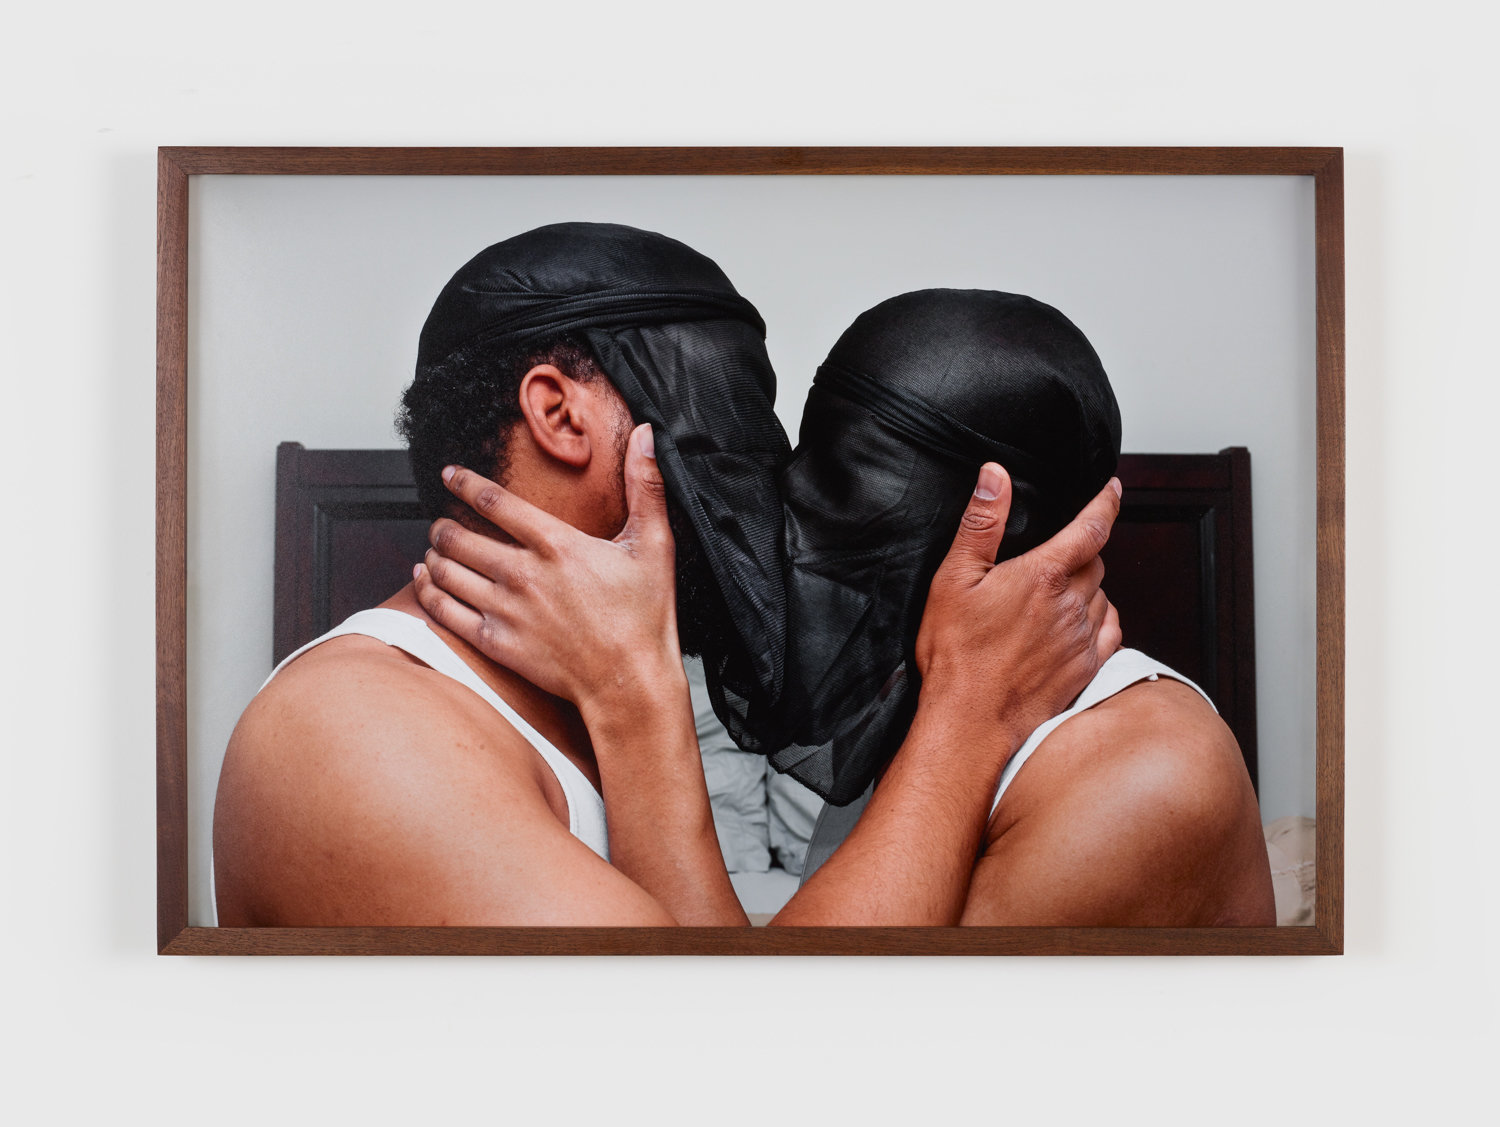 D’Angelo Lovell Williams’ photograph ‘The Lovers’ is included in the group exhibition ‘Young, Gifted and Black.’ It features 50 contemporary pieces by numerous artists of various African backgrounds, all of which is on display at the Lehman College Art Gallery through May 2.